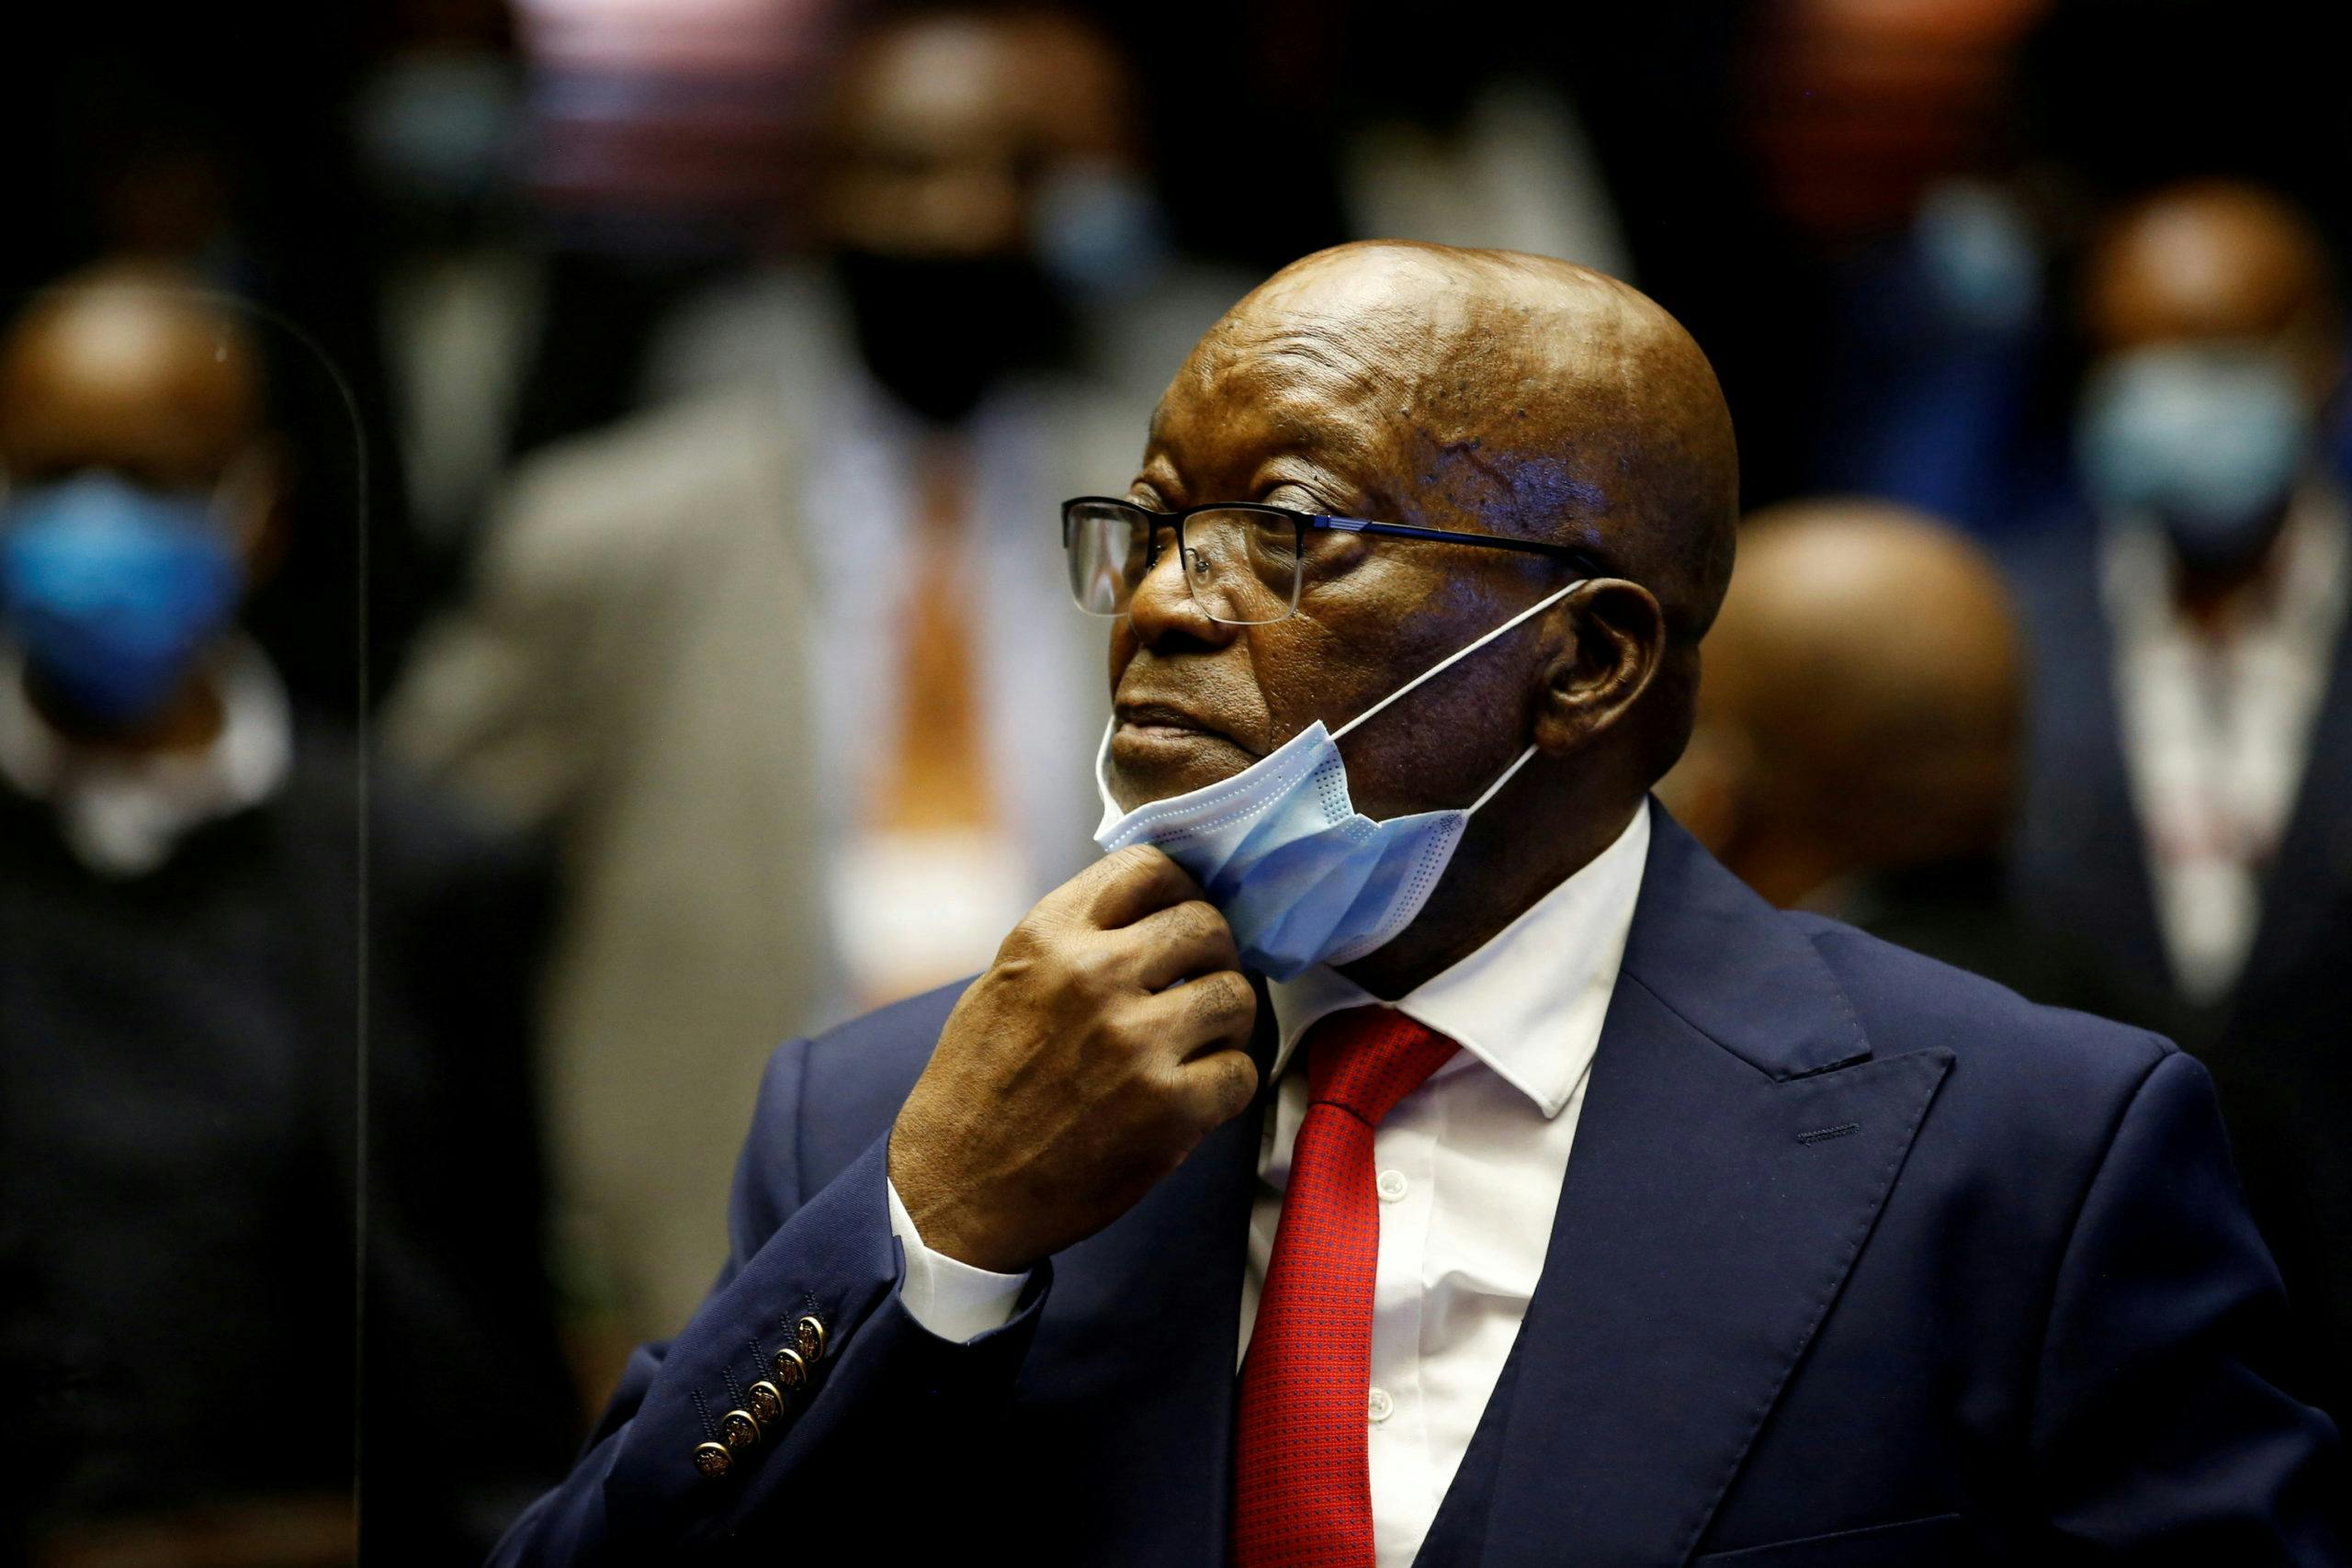 Jacob Zuma’s jailing shows up South African government’s failures after end of apartheid